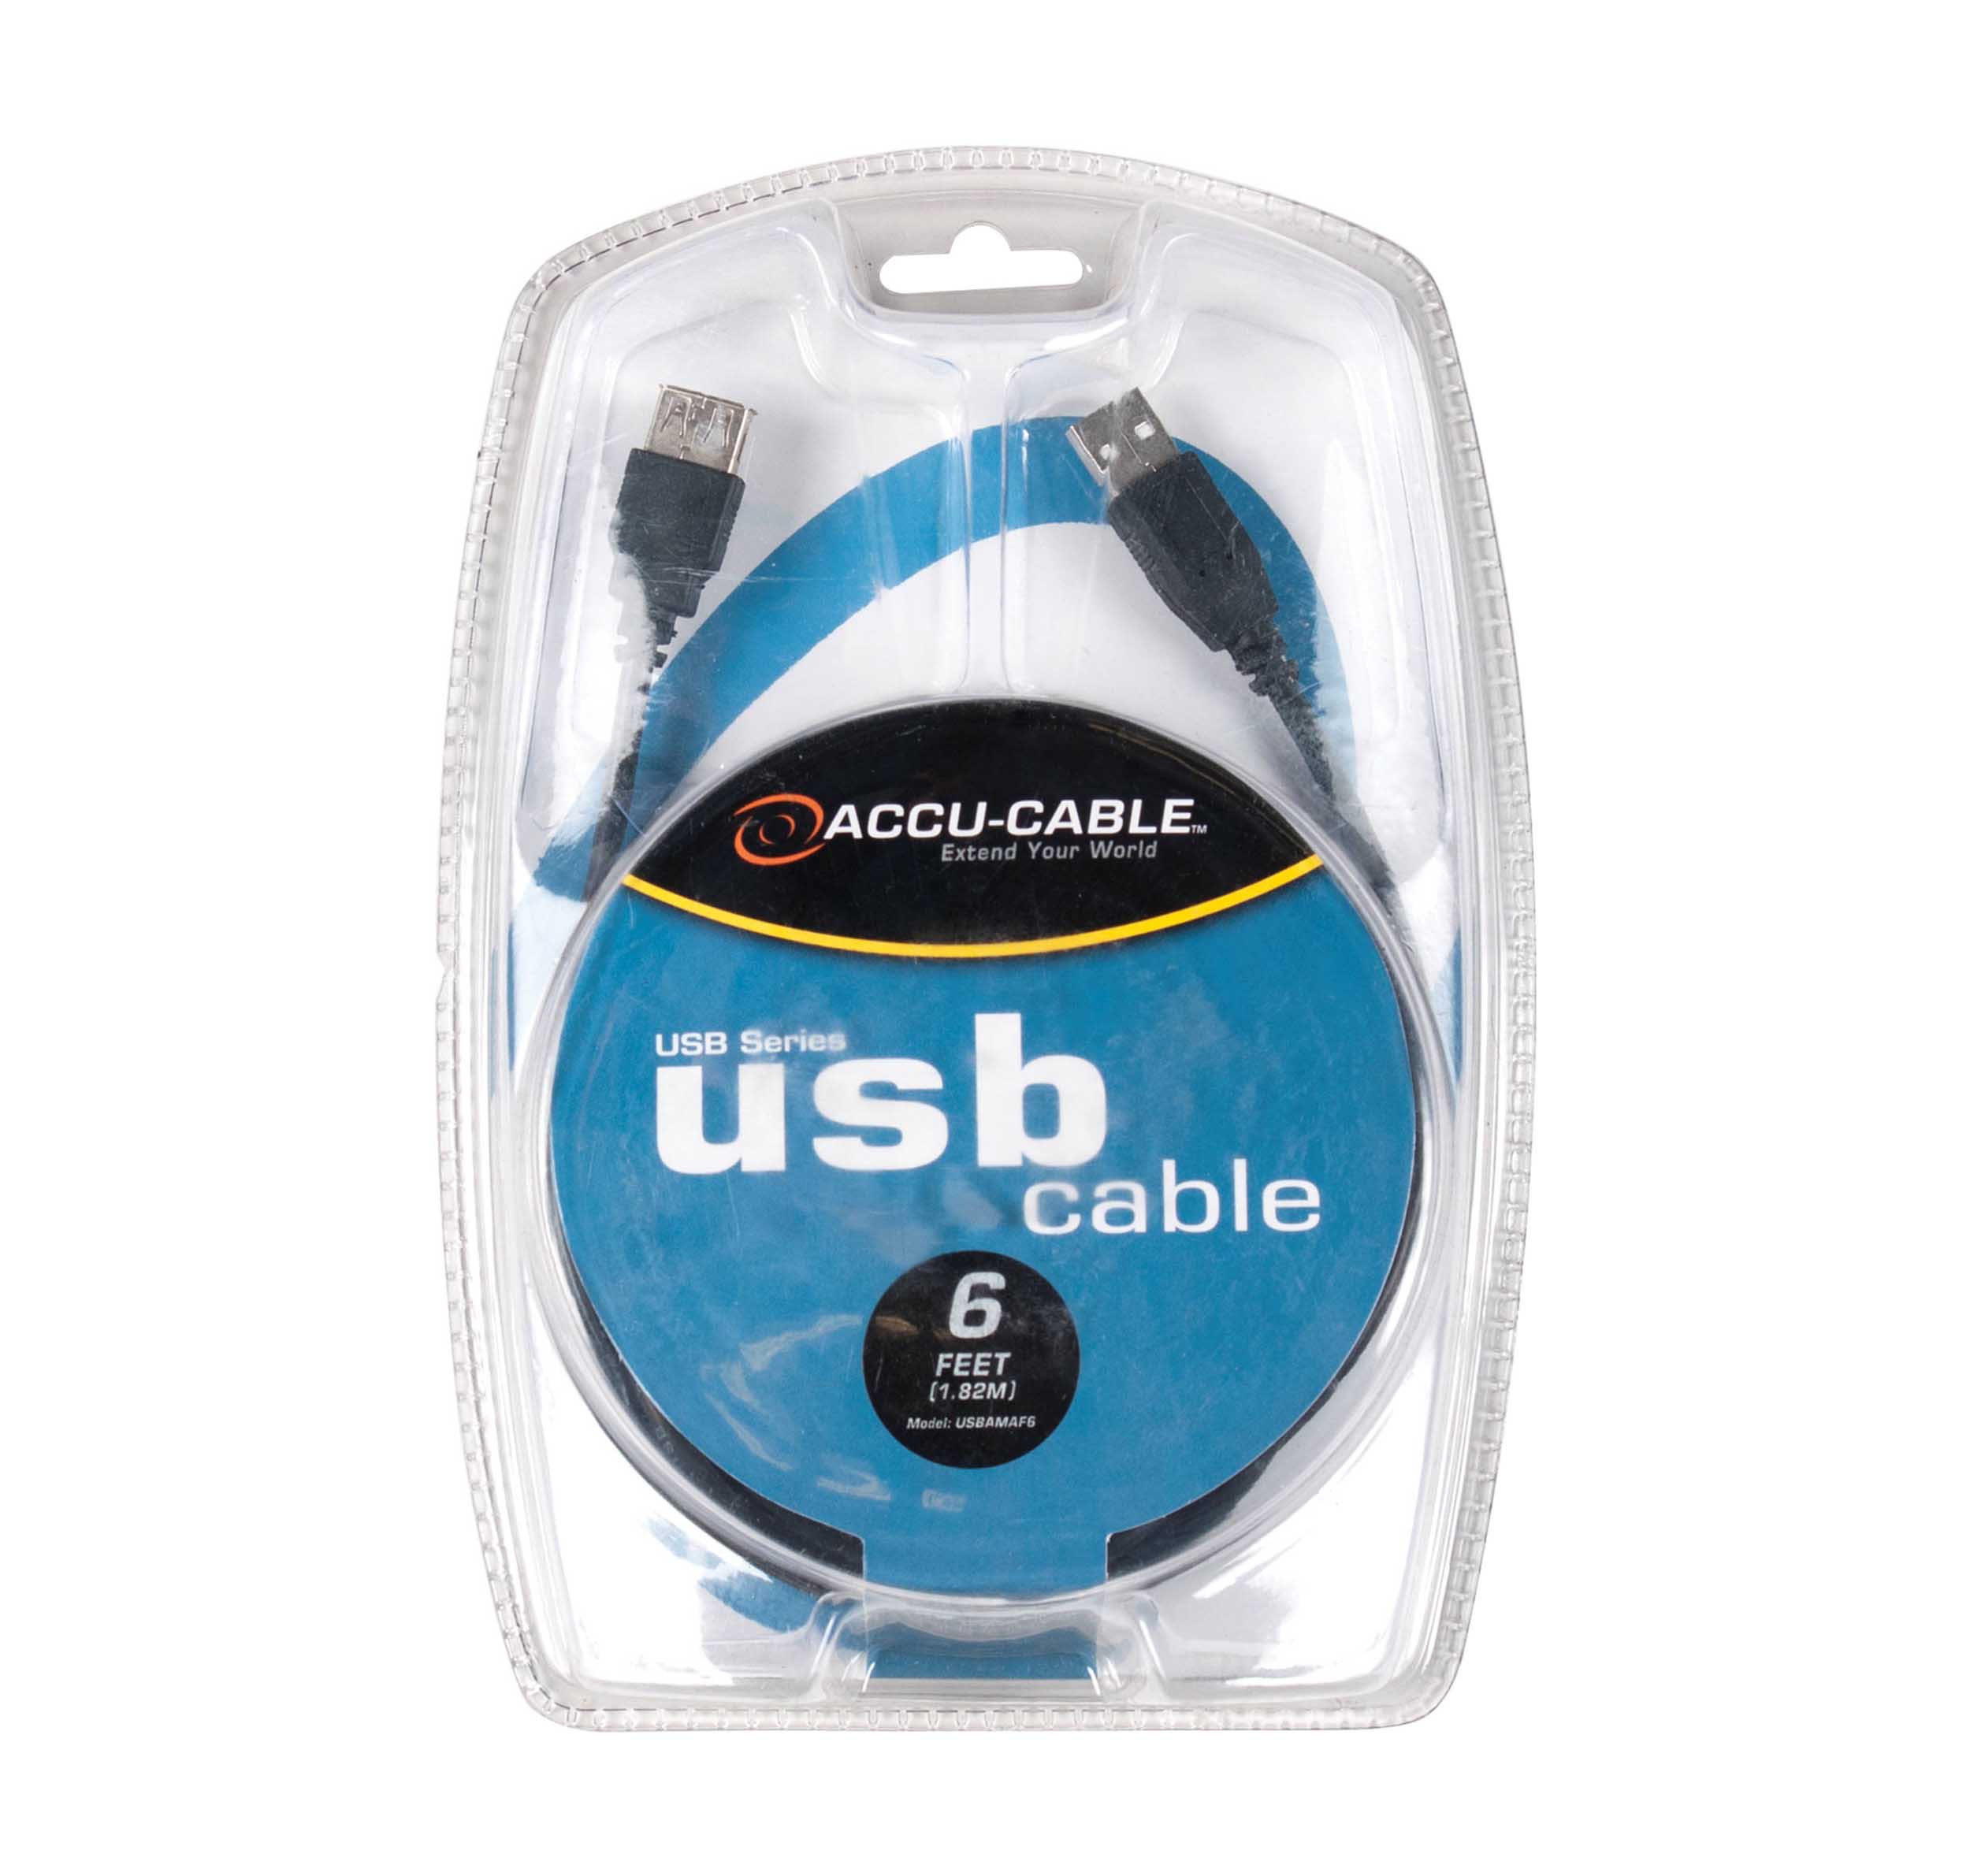 Accu-Cable USBAMAF6, USB 2.0 Type A Male to Type A Female Extension Cable - 6 Ft by Accu Cable